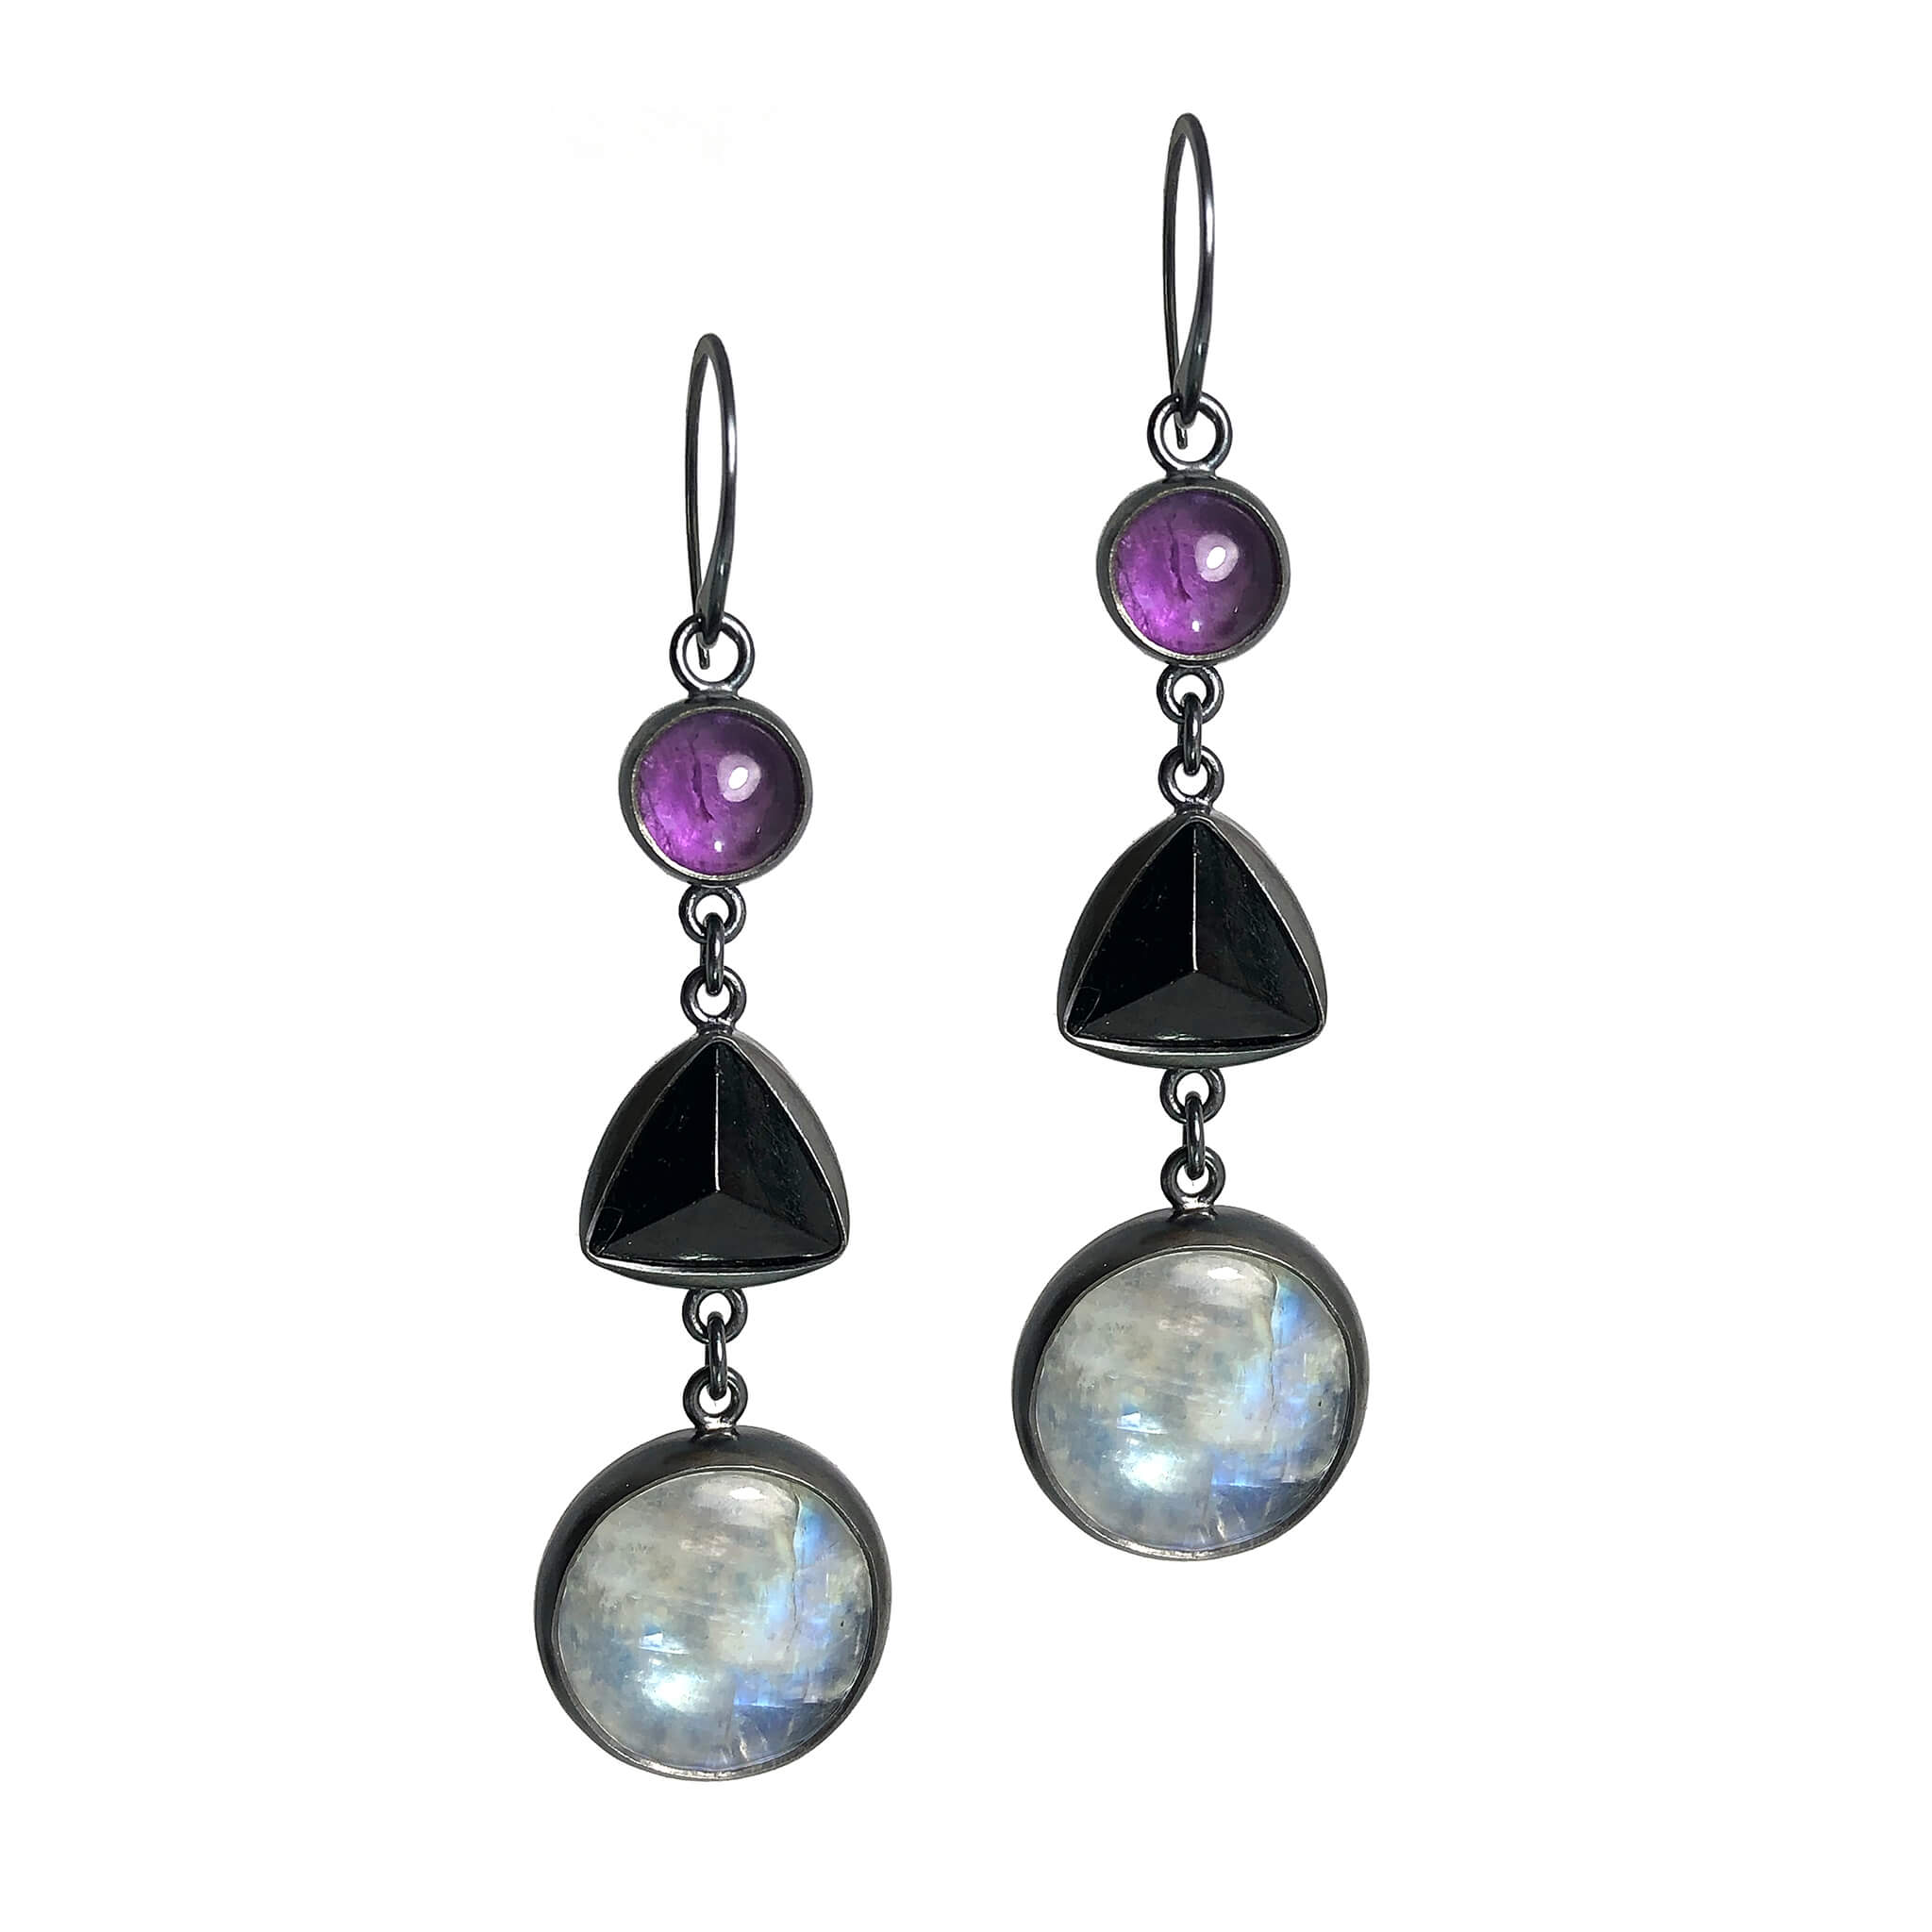 Amethyst, Black Tourmaline, Moonstone Earrings.  Season of the Witch collection by Alex Lozier Jewelry.